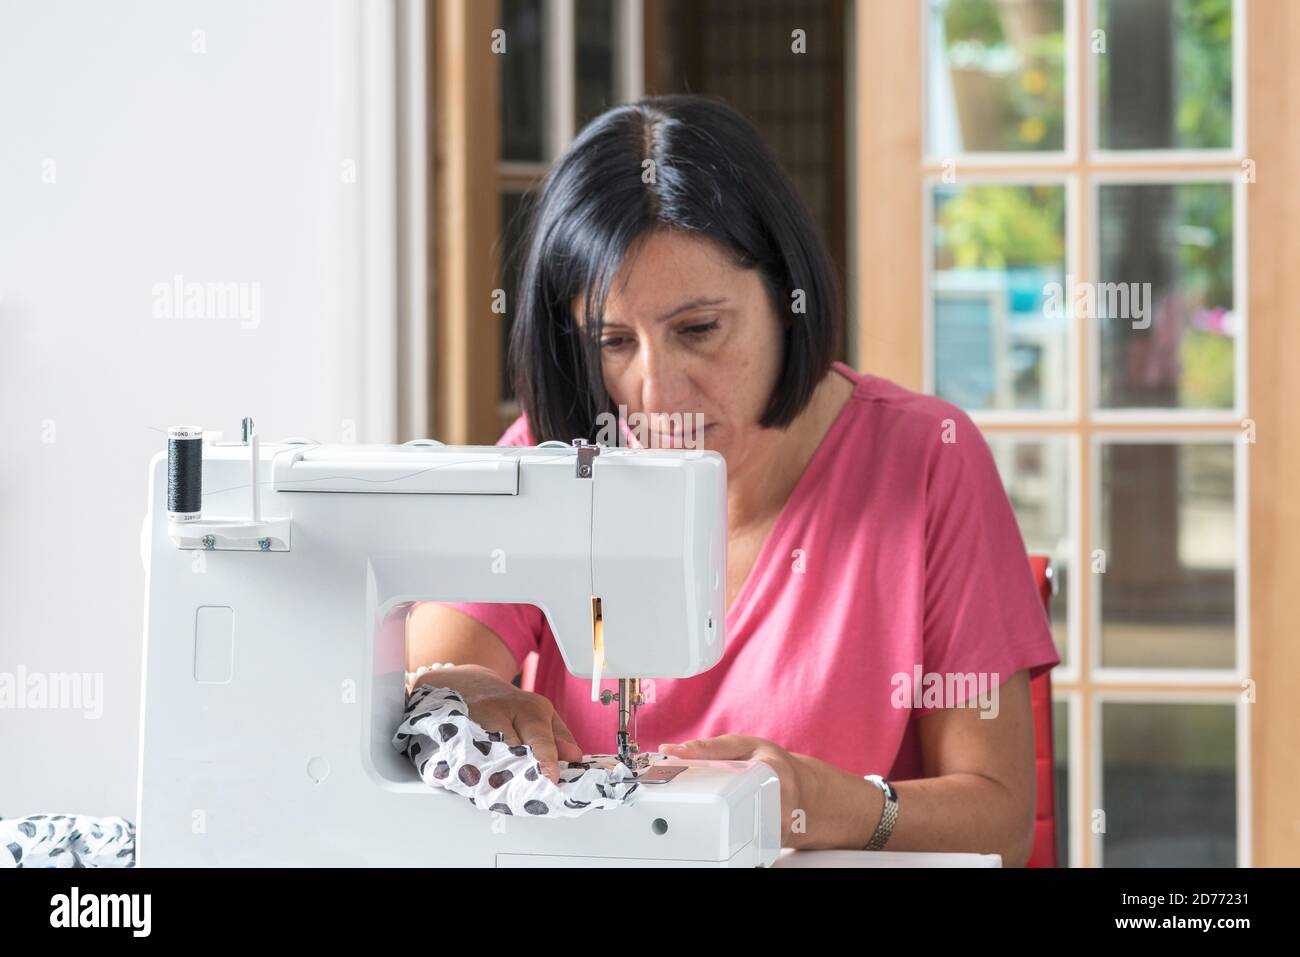 Woman  making home made face masks on sewing machine, Stock Photo